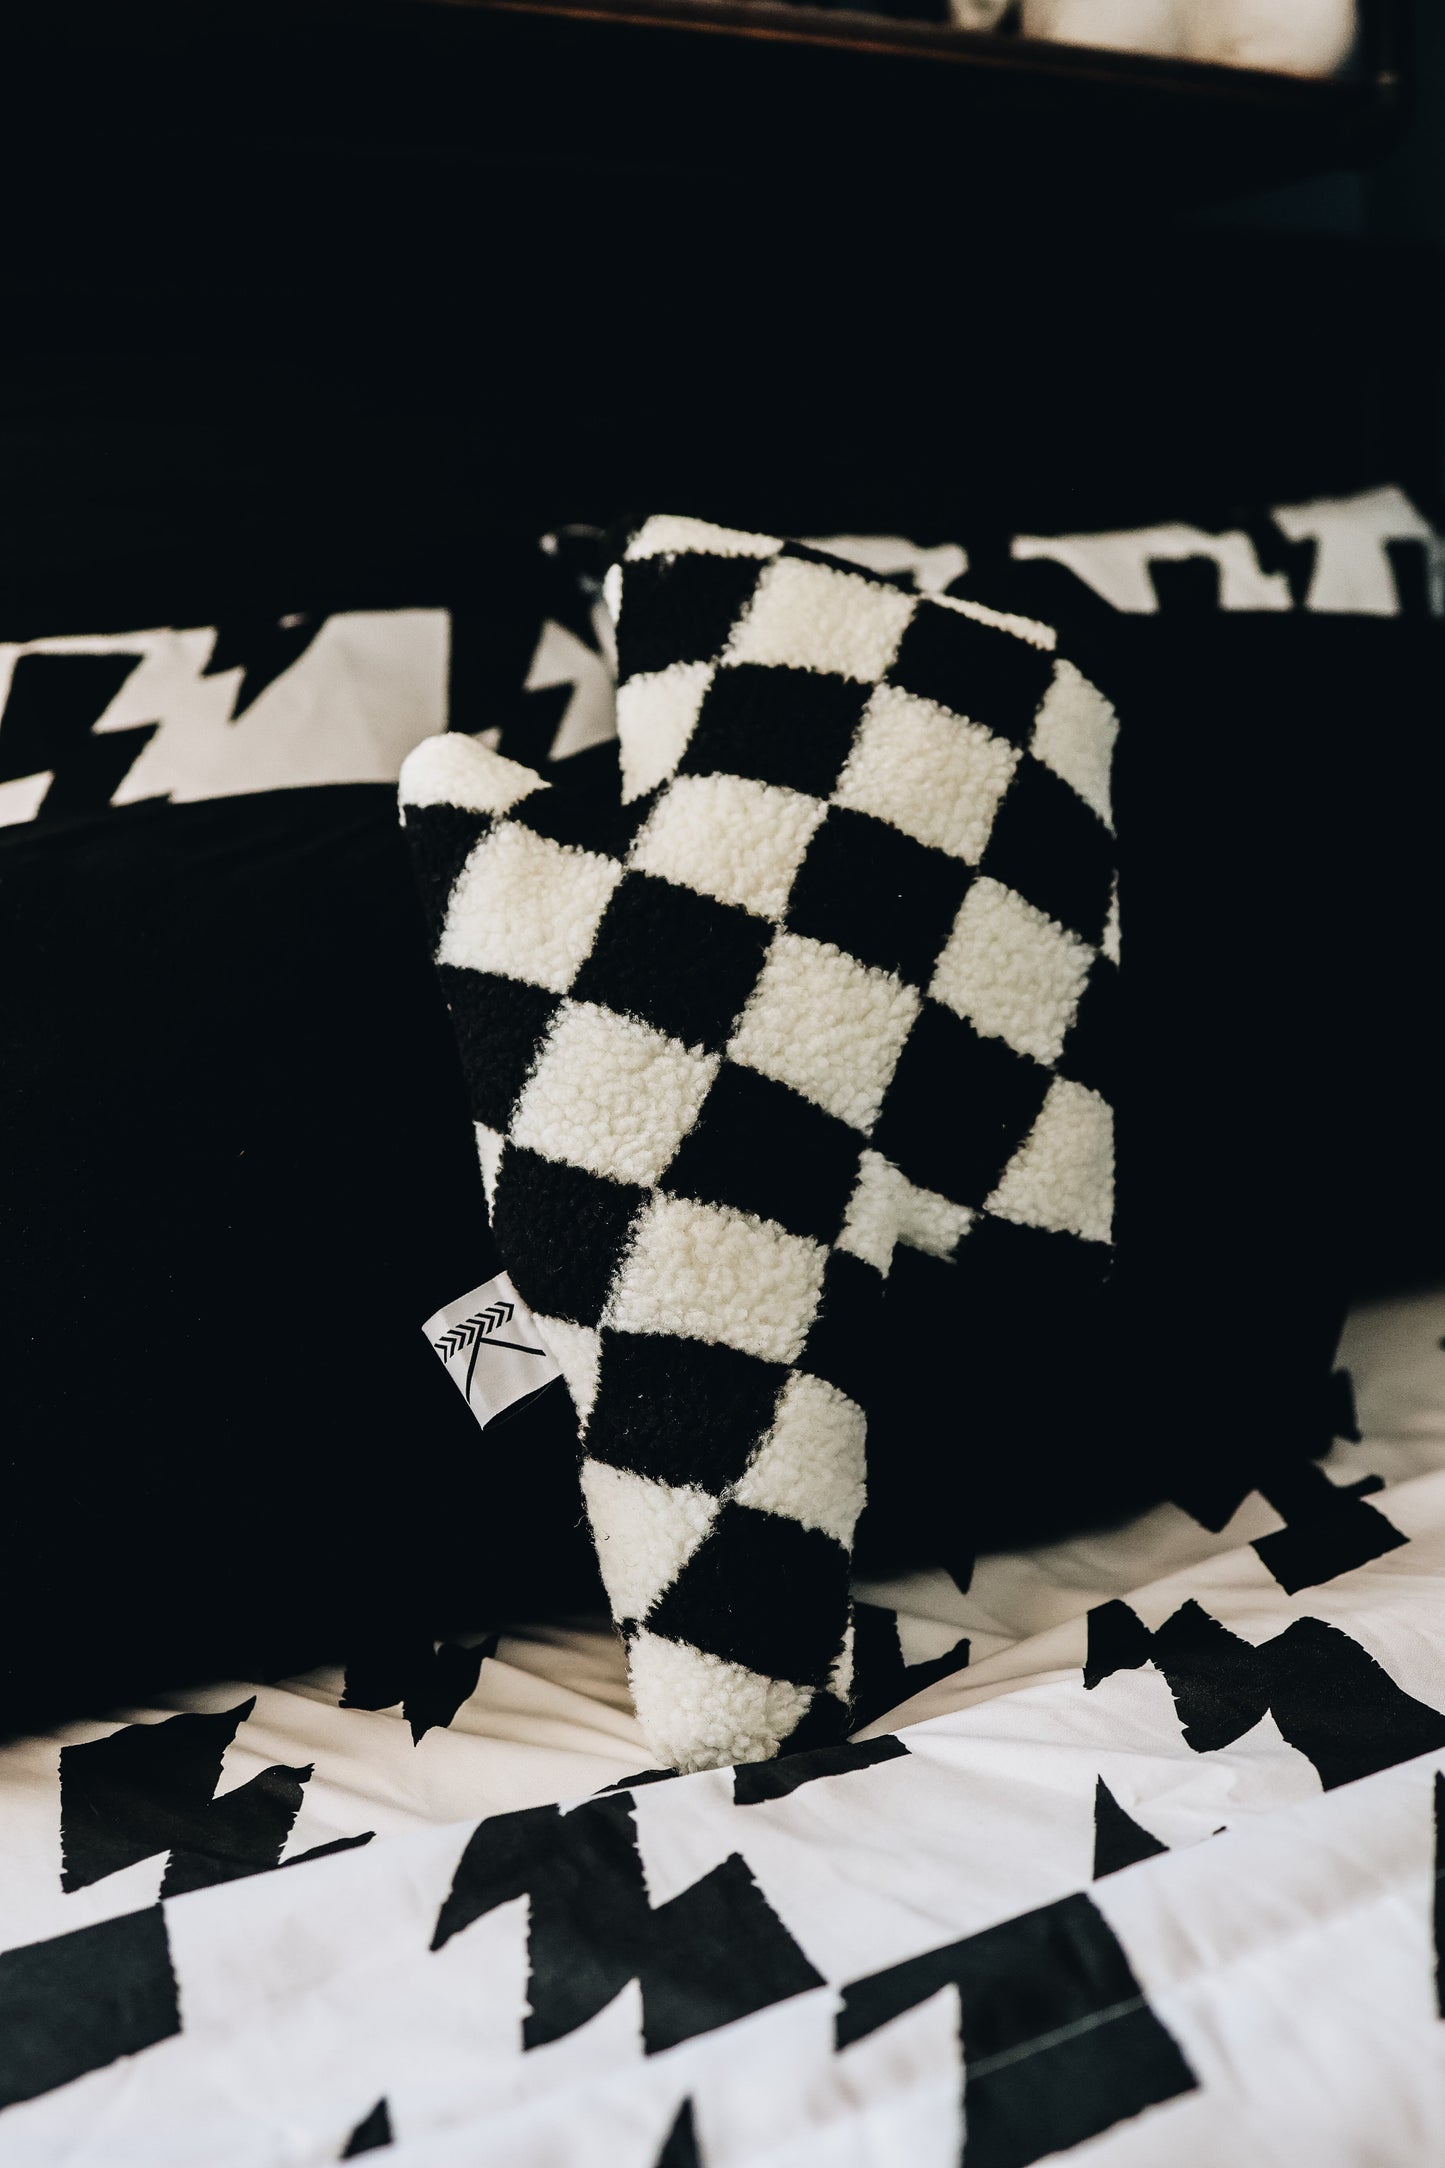 *Pre-Order* Black Check Bolt Plush Pillow estimated shipping end of May read all details prior to purchasing